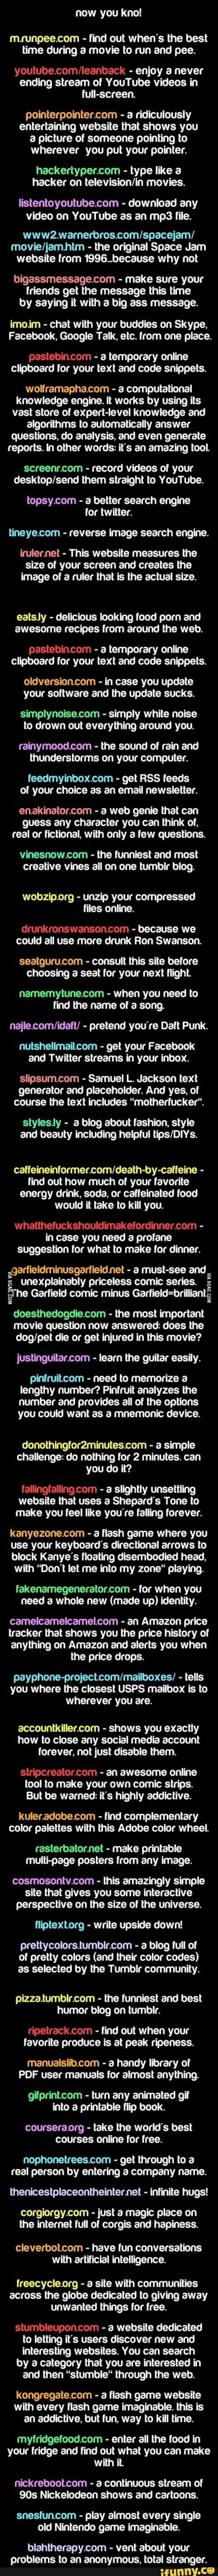 Interesting sites to cure your boredom - 9GAG